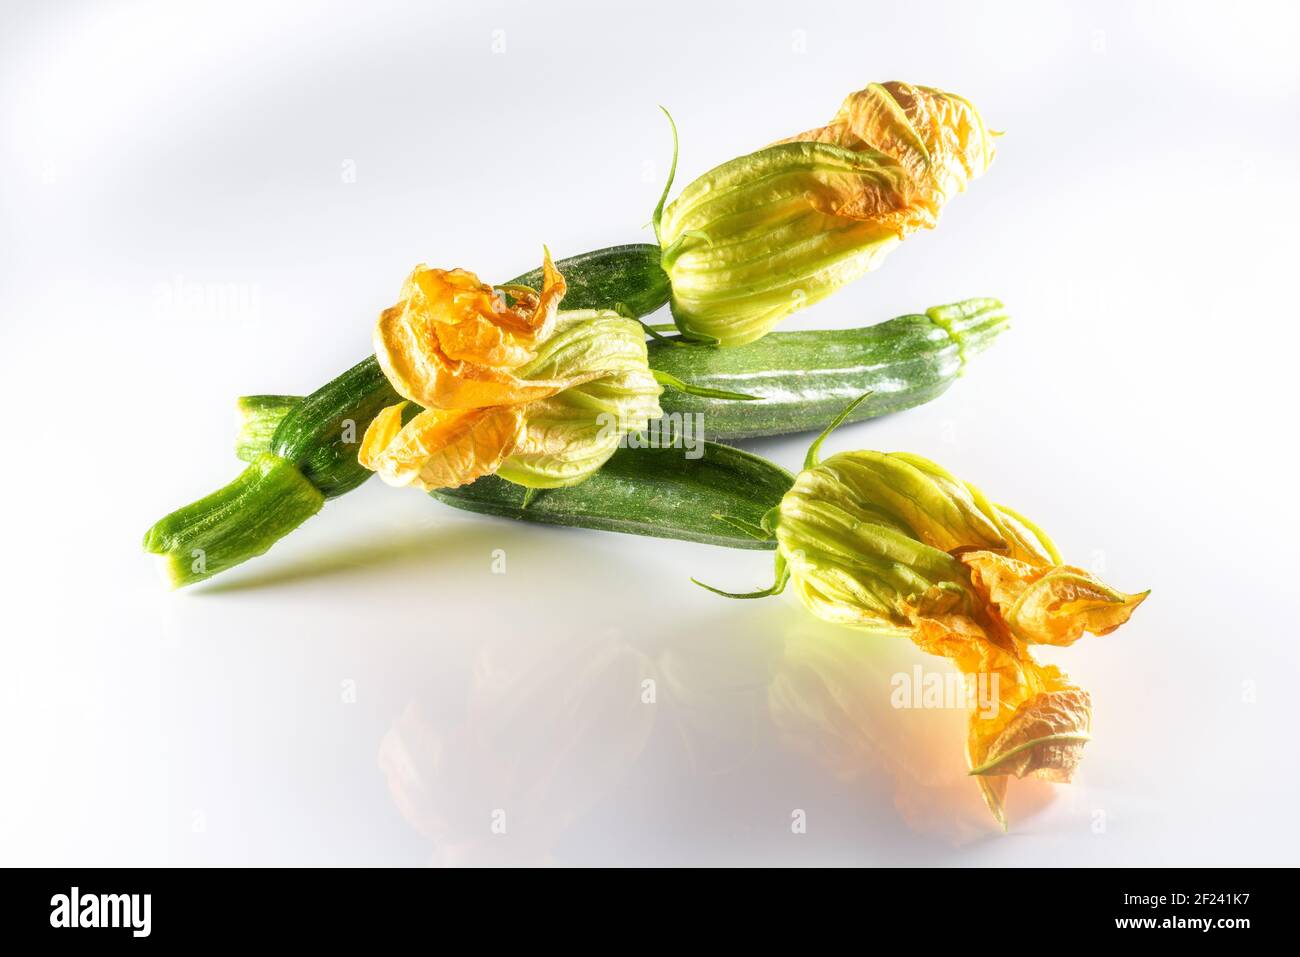 Zucchini with flowers on a white background. Seasonal vegetables concept. Stock Photo